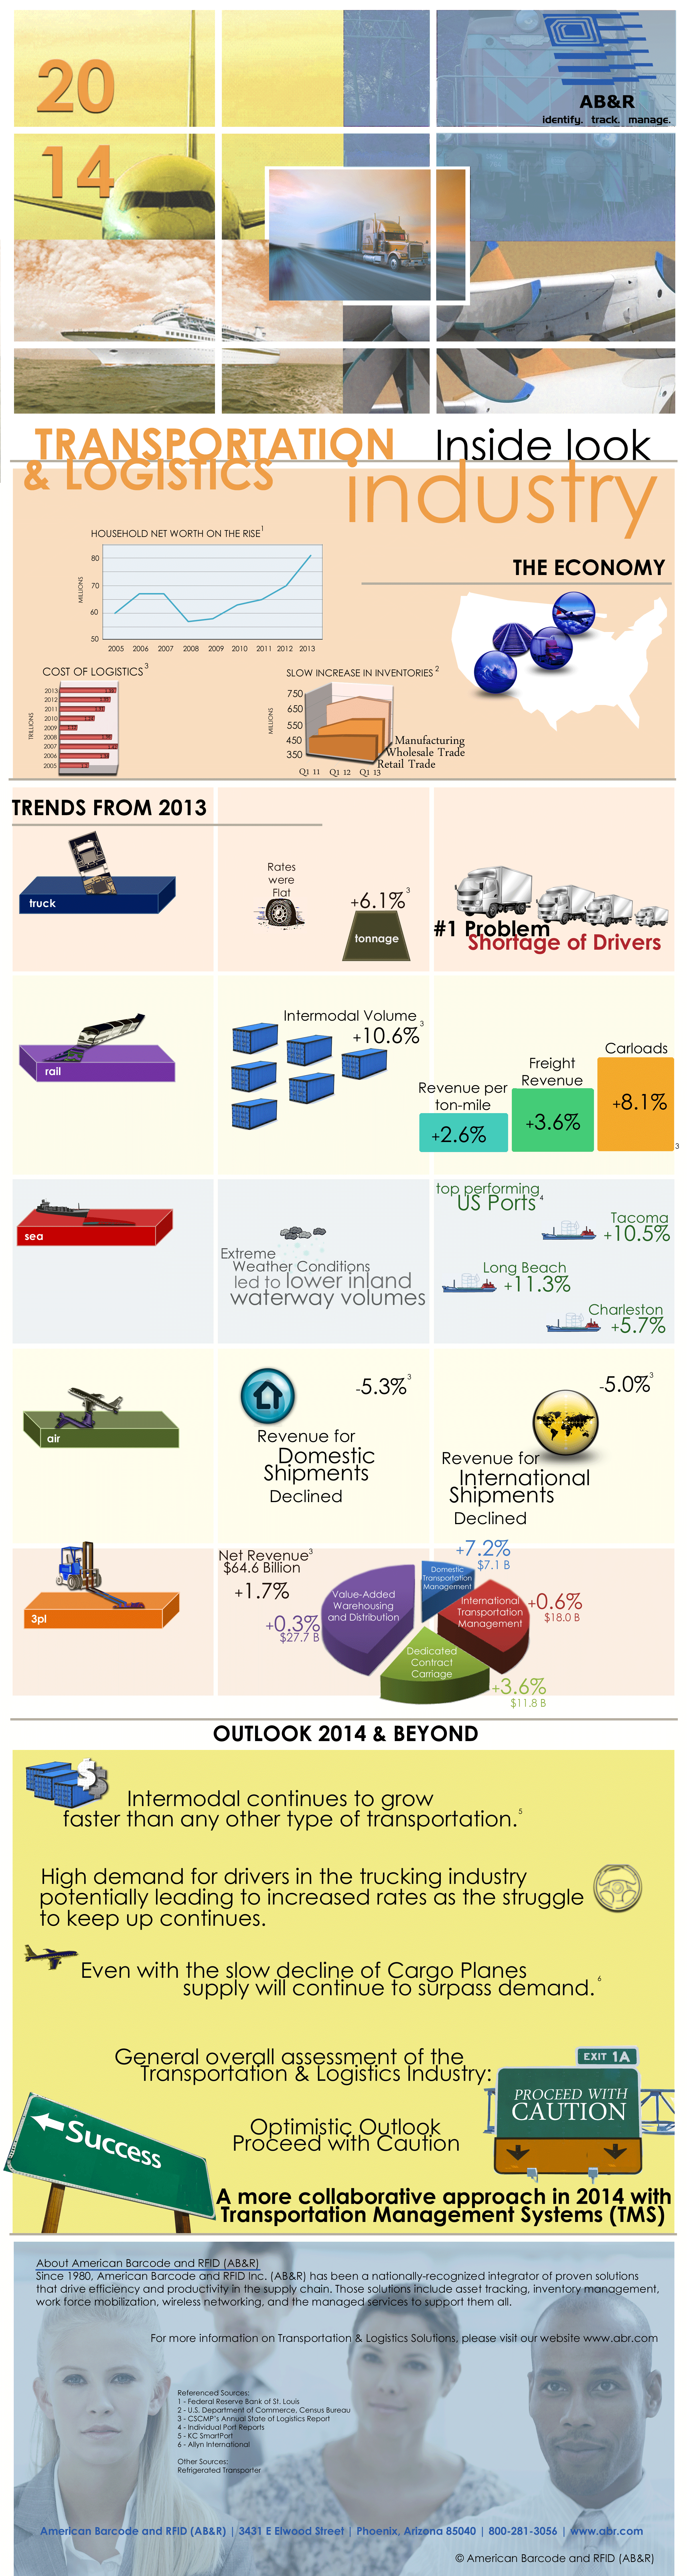 Transportation & Logistics State of the Industry Infographic